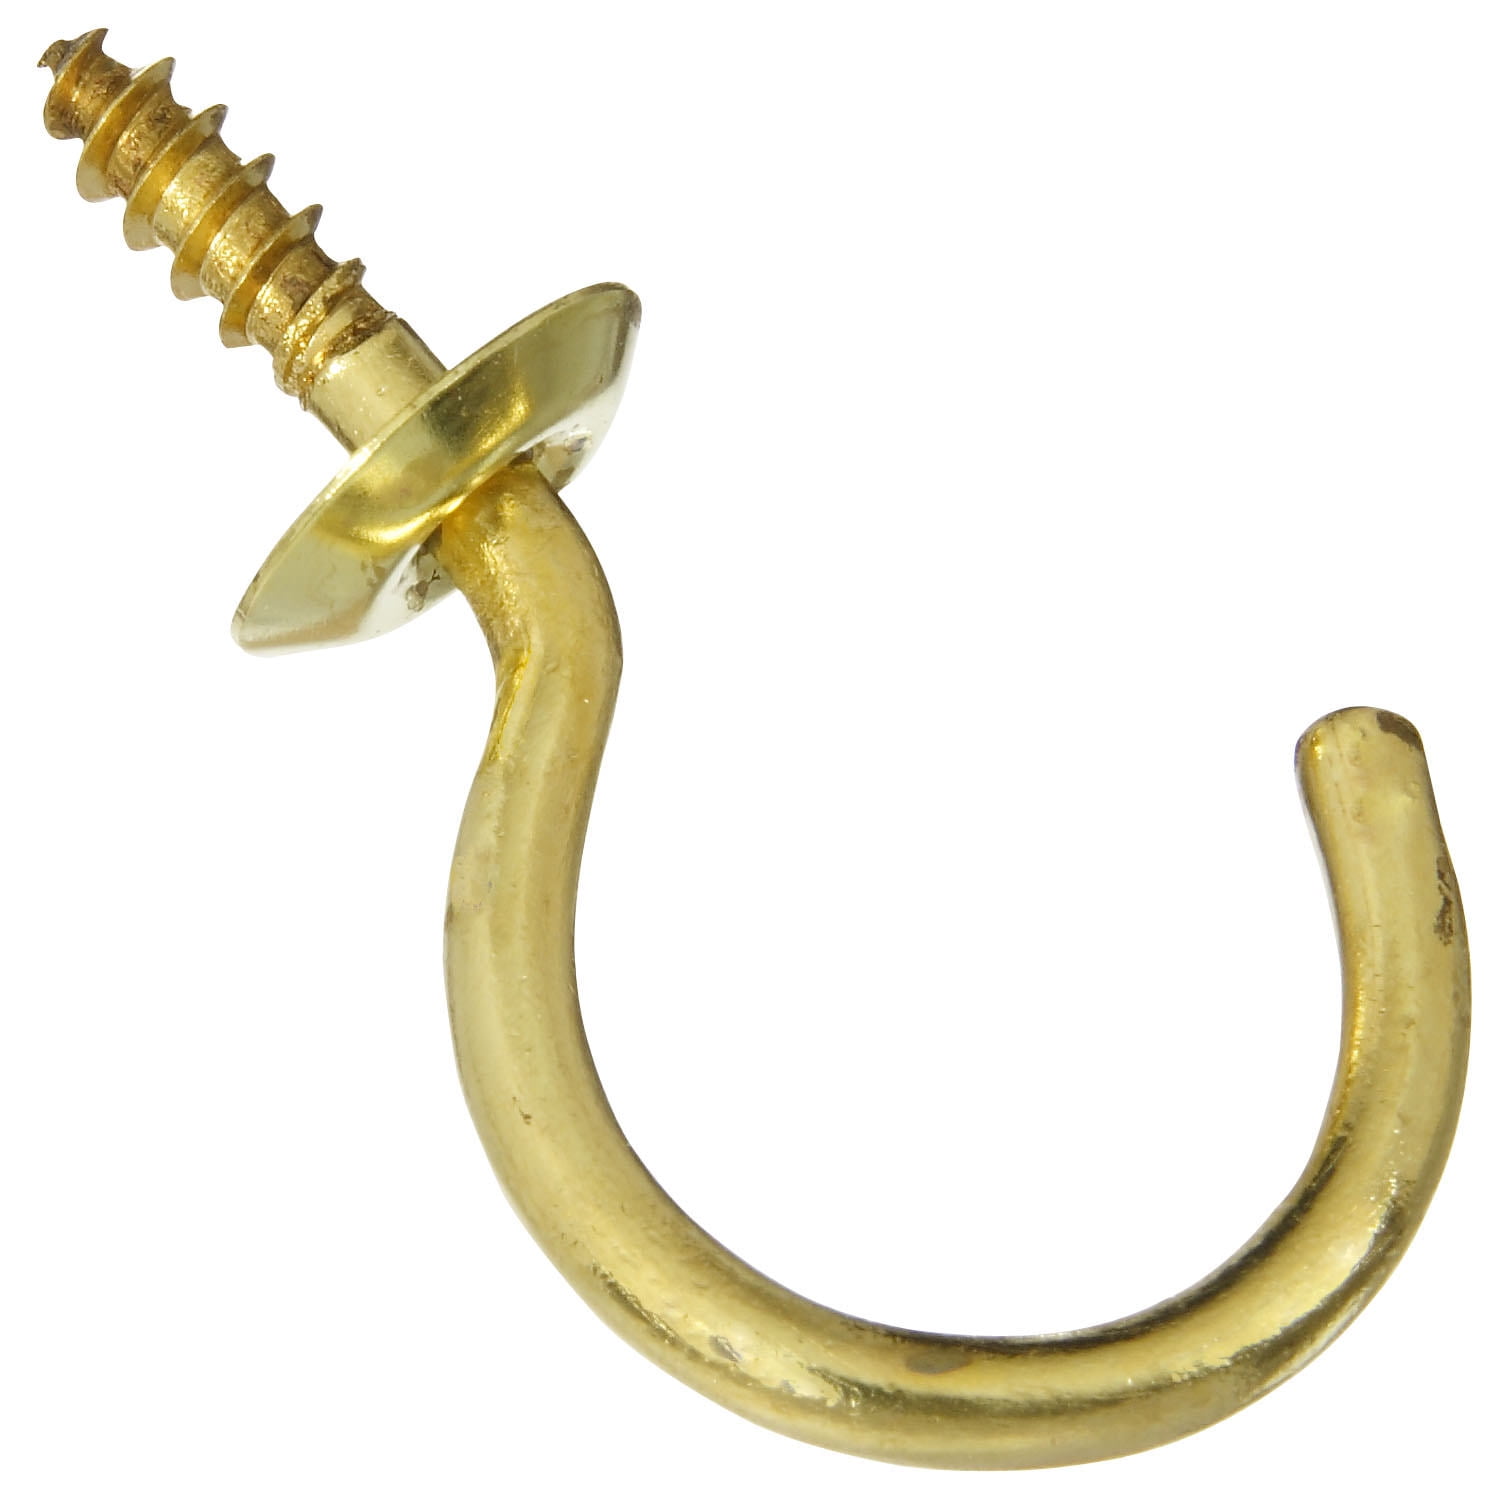 Small Brass Ceiling Hooks 5/8 Screw-in Light Hooks Gold Hanging Cup Hook 40Pack & 100Pack Mini Eyes Screw Hooks for Jewelry Eye Pin 